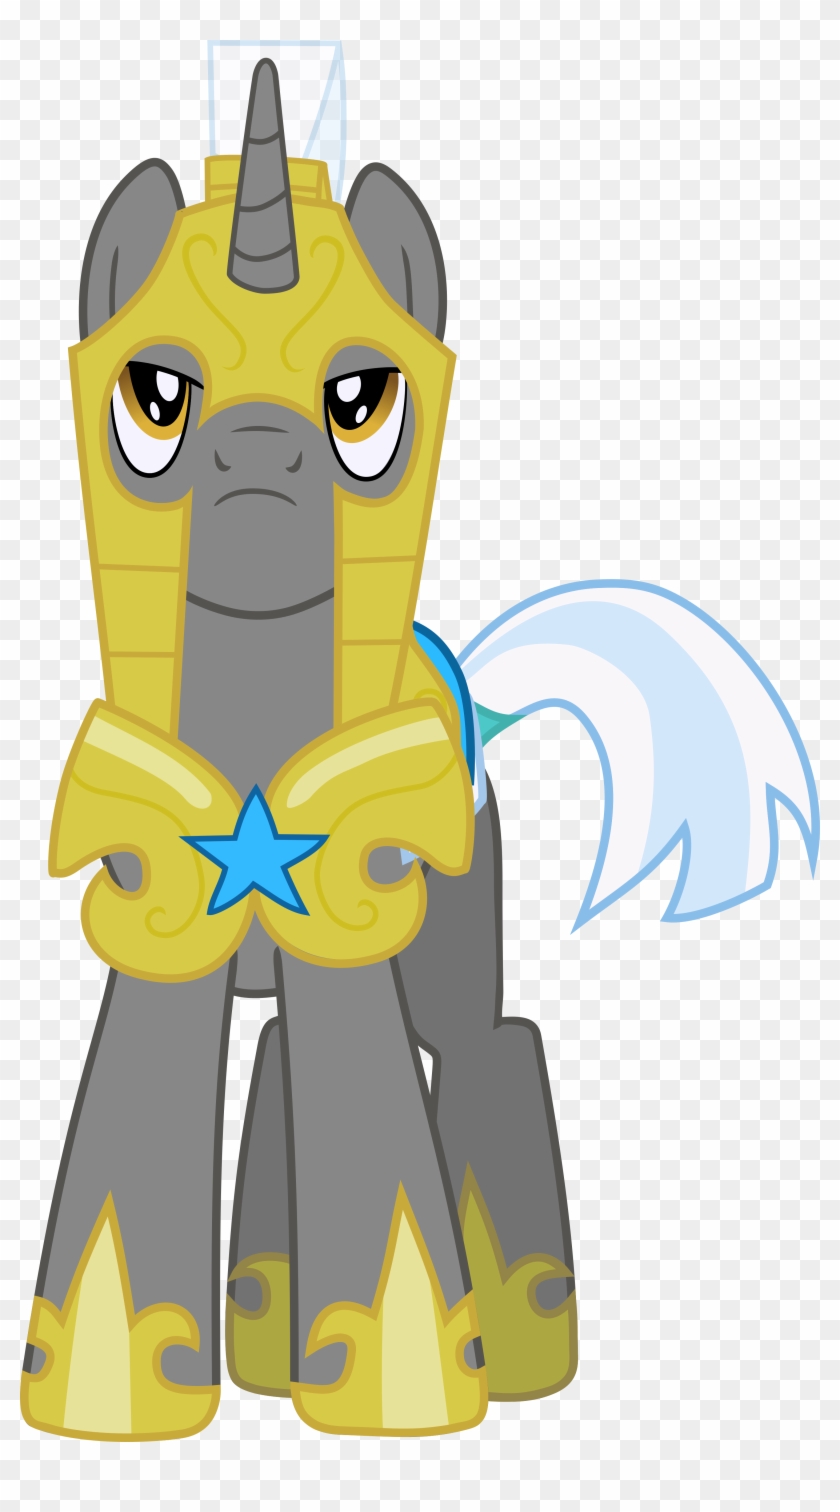 Royal Unicorn Guard Vector By Neighthirst Royal Unicorn - Mlp Royal Guard Unicorn #400240